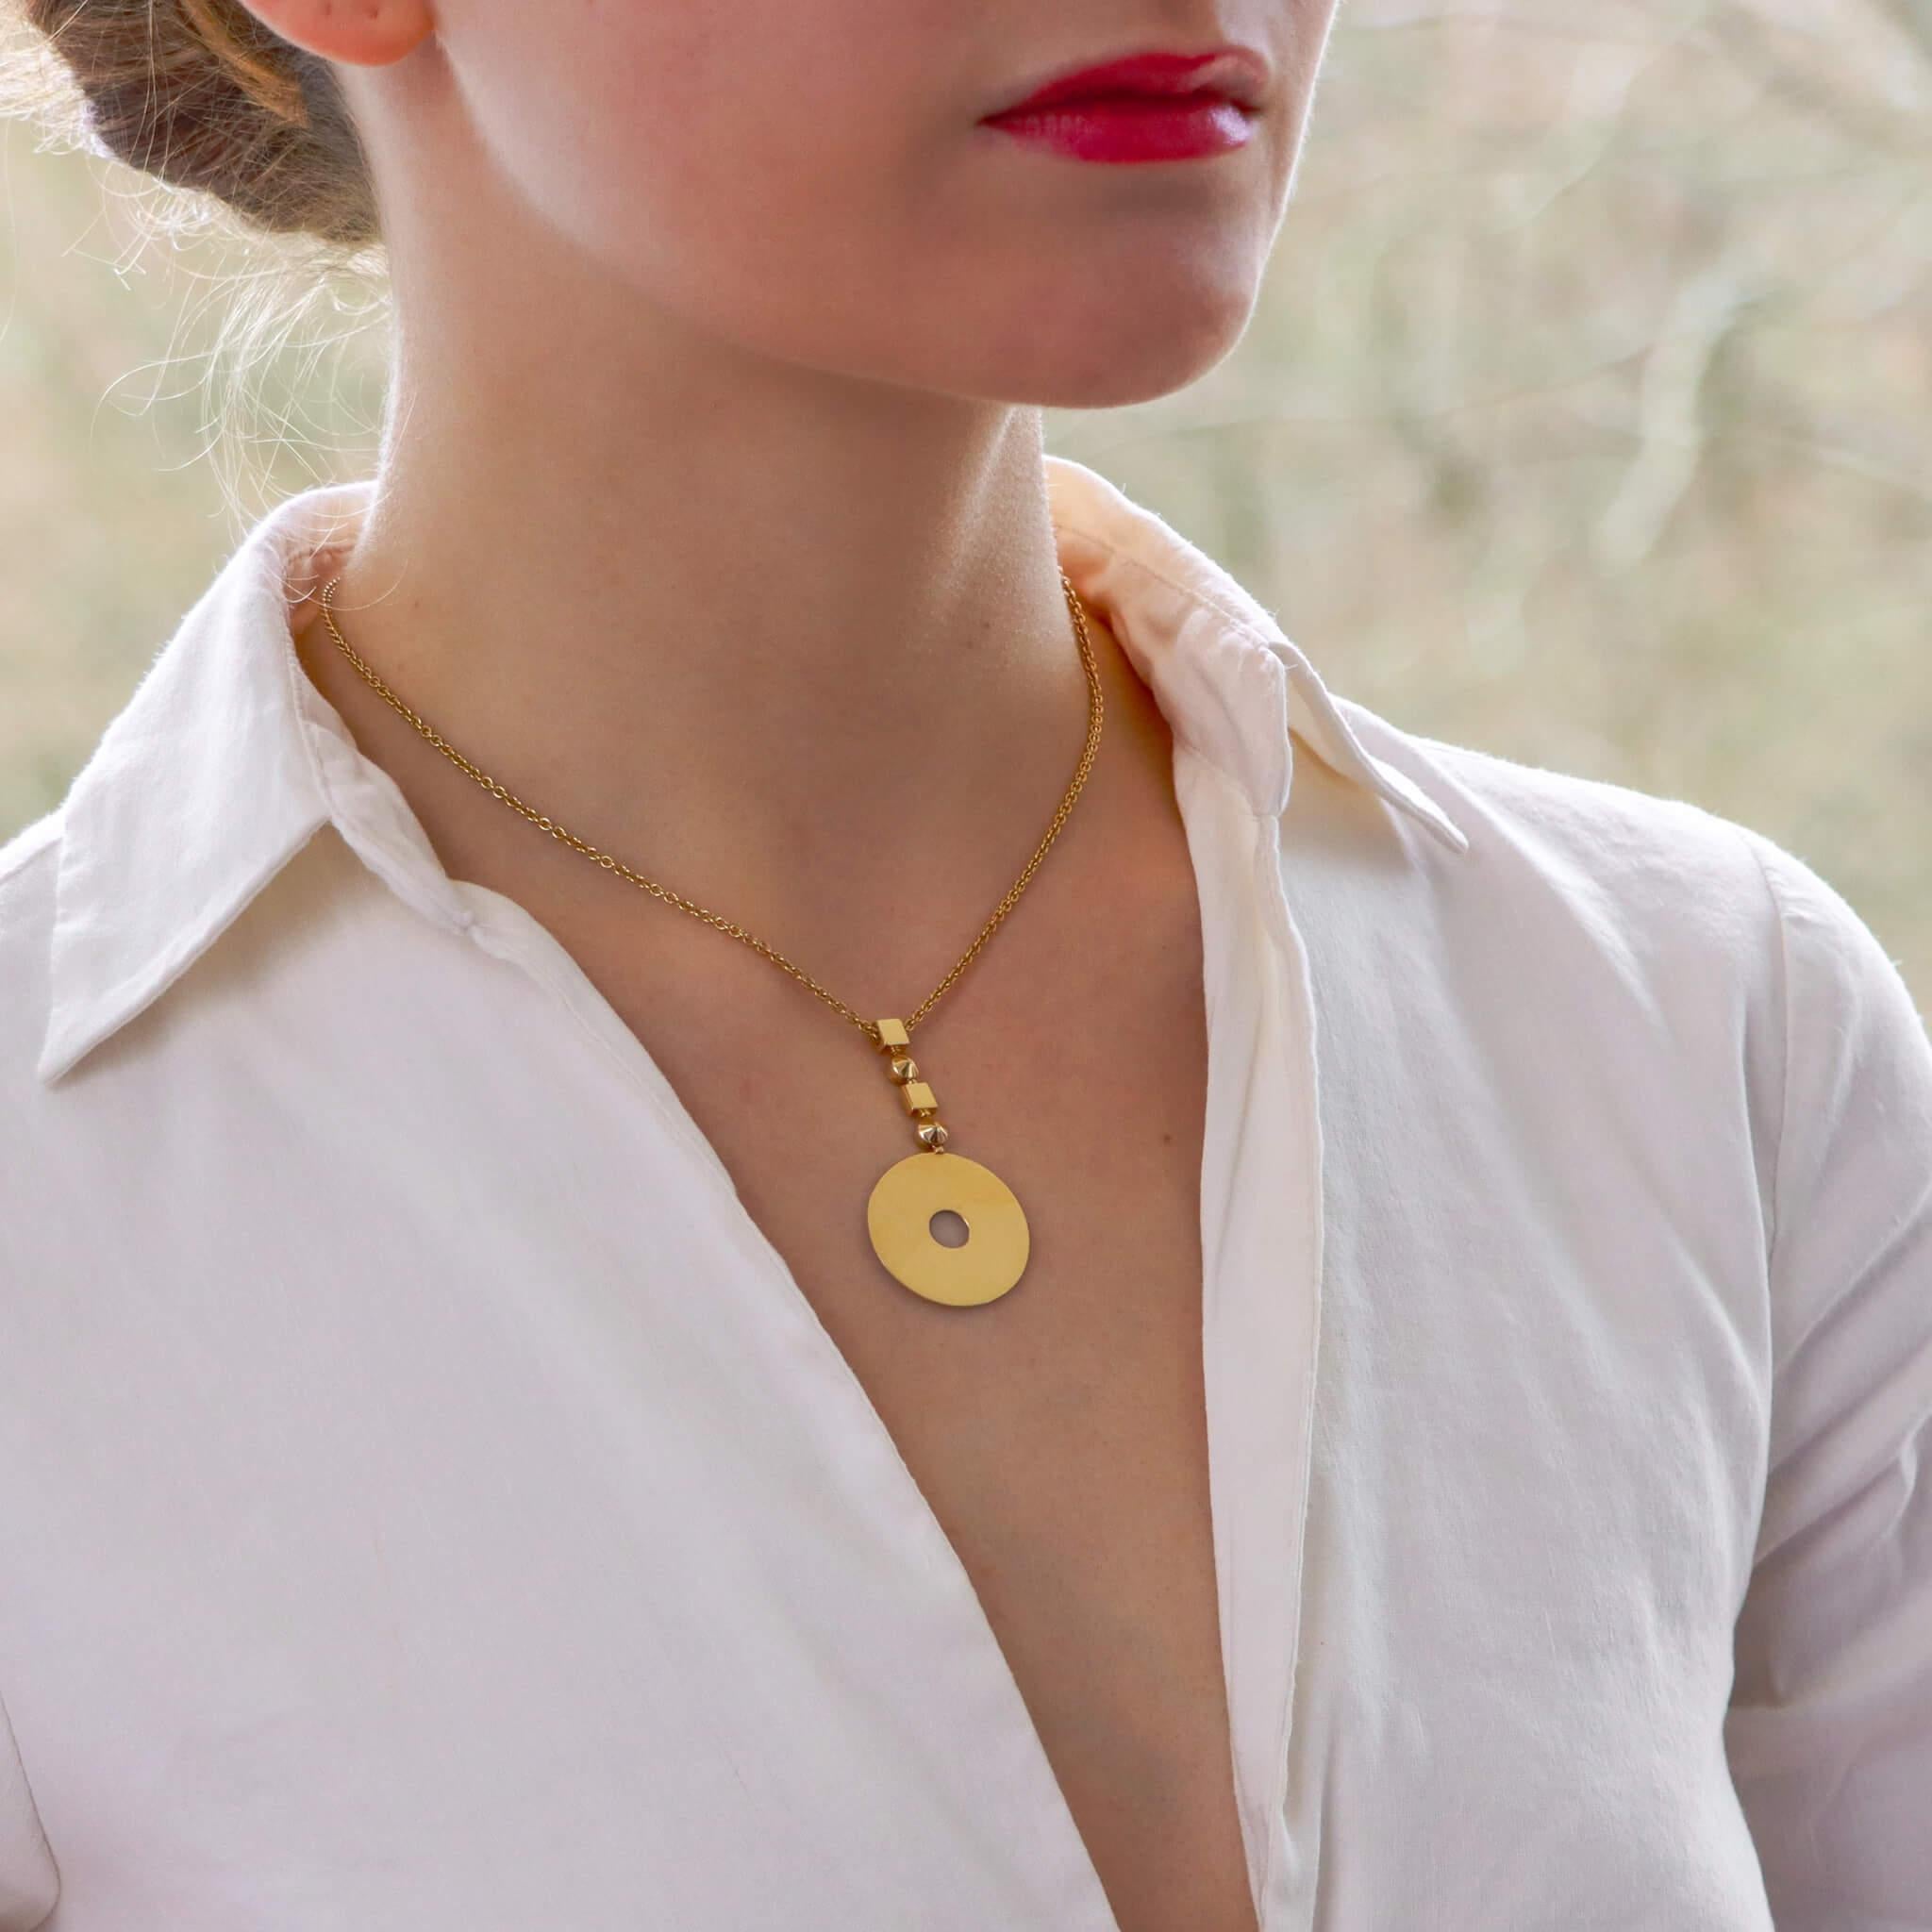 A beautiful vintage Bvlgari circular disc pendant set in solid 18k yellow gold.

The pendant is composed of a solid 18k polished yellow gold disc pierced centrally with a circular opening. The disc suspends from a geometric inspired bail composed of